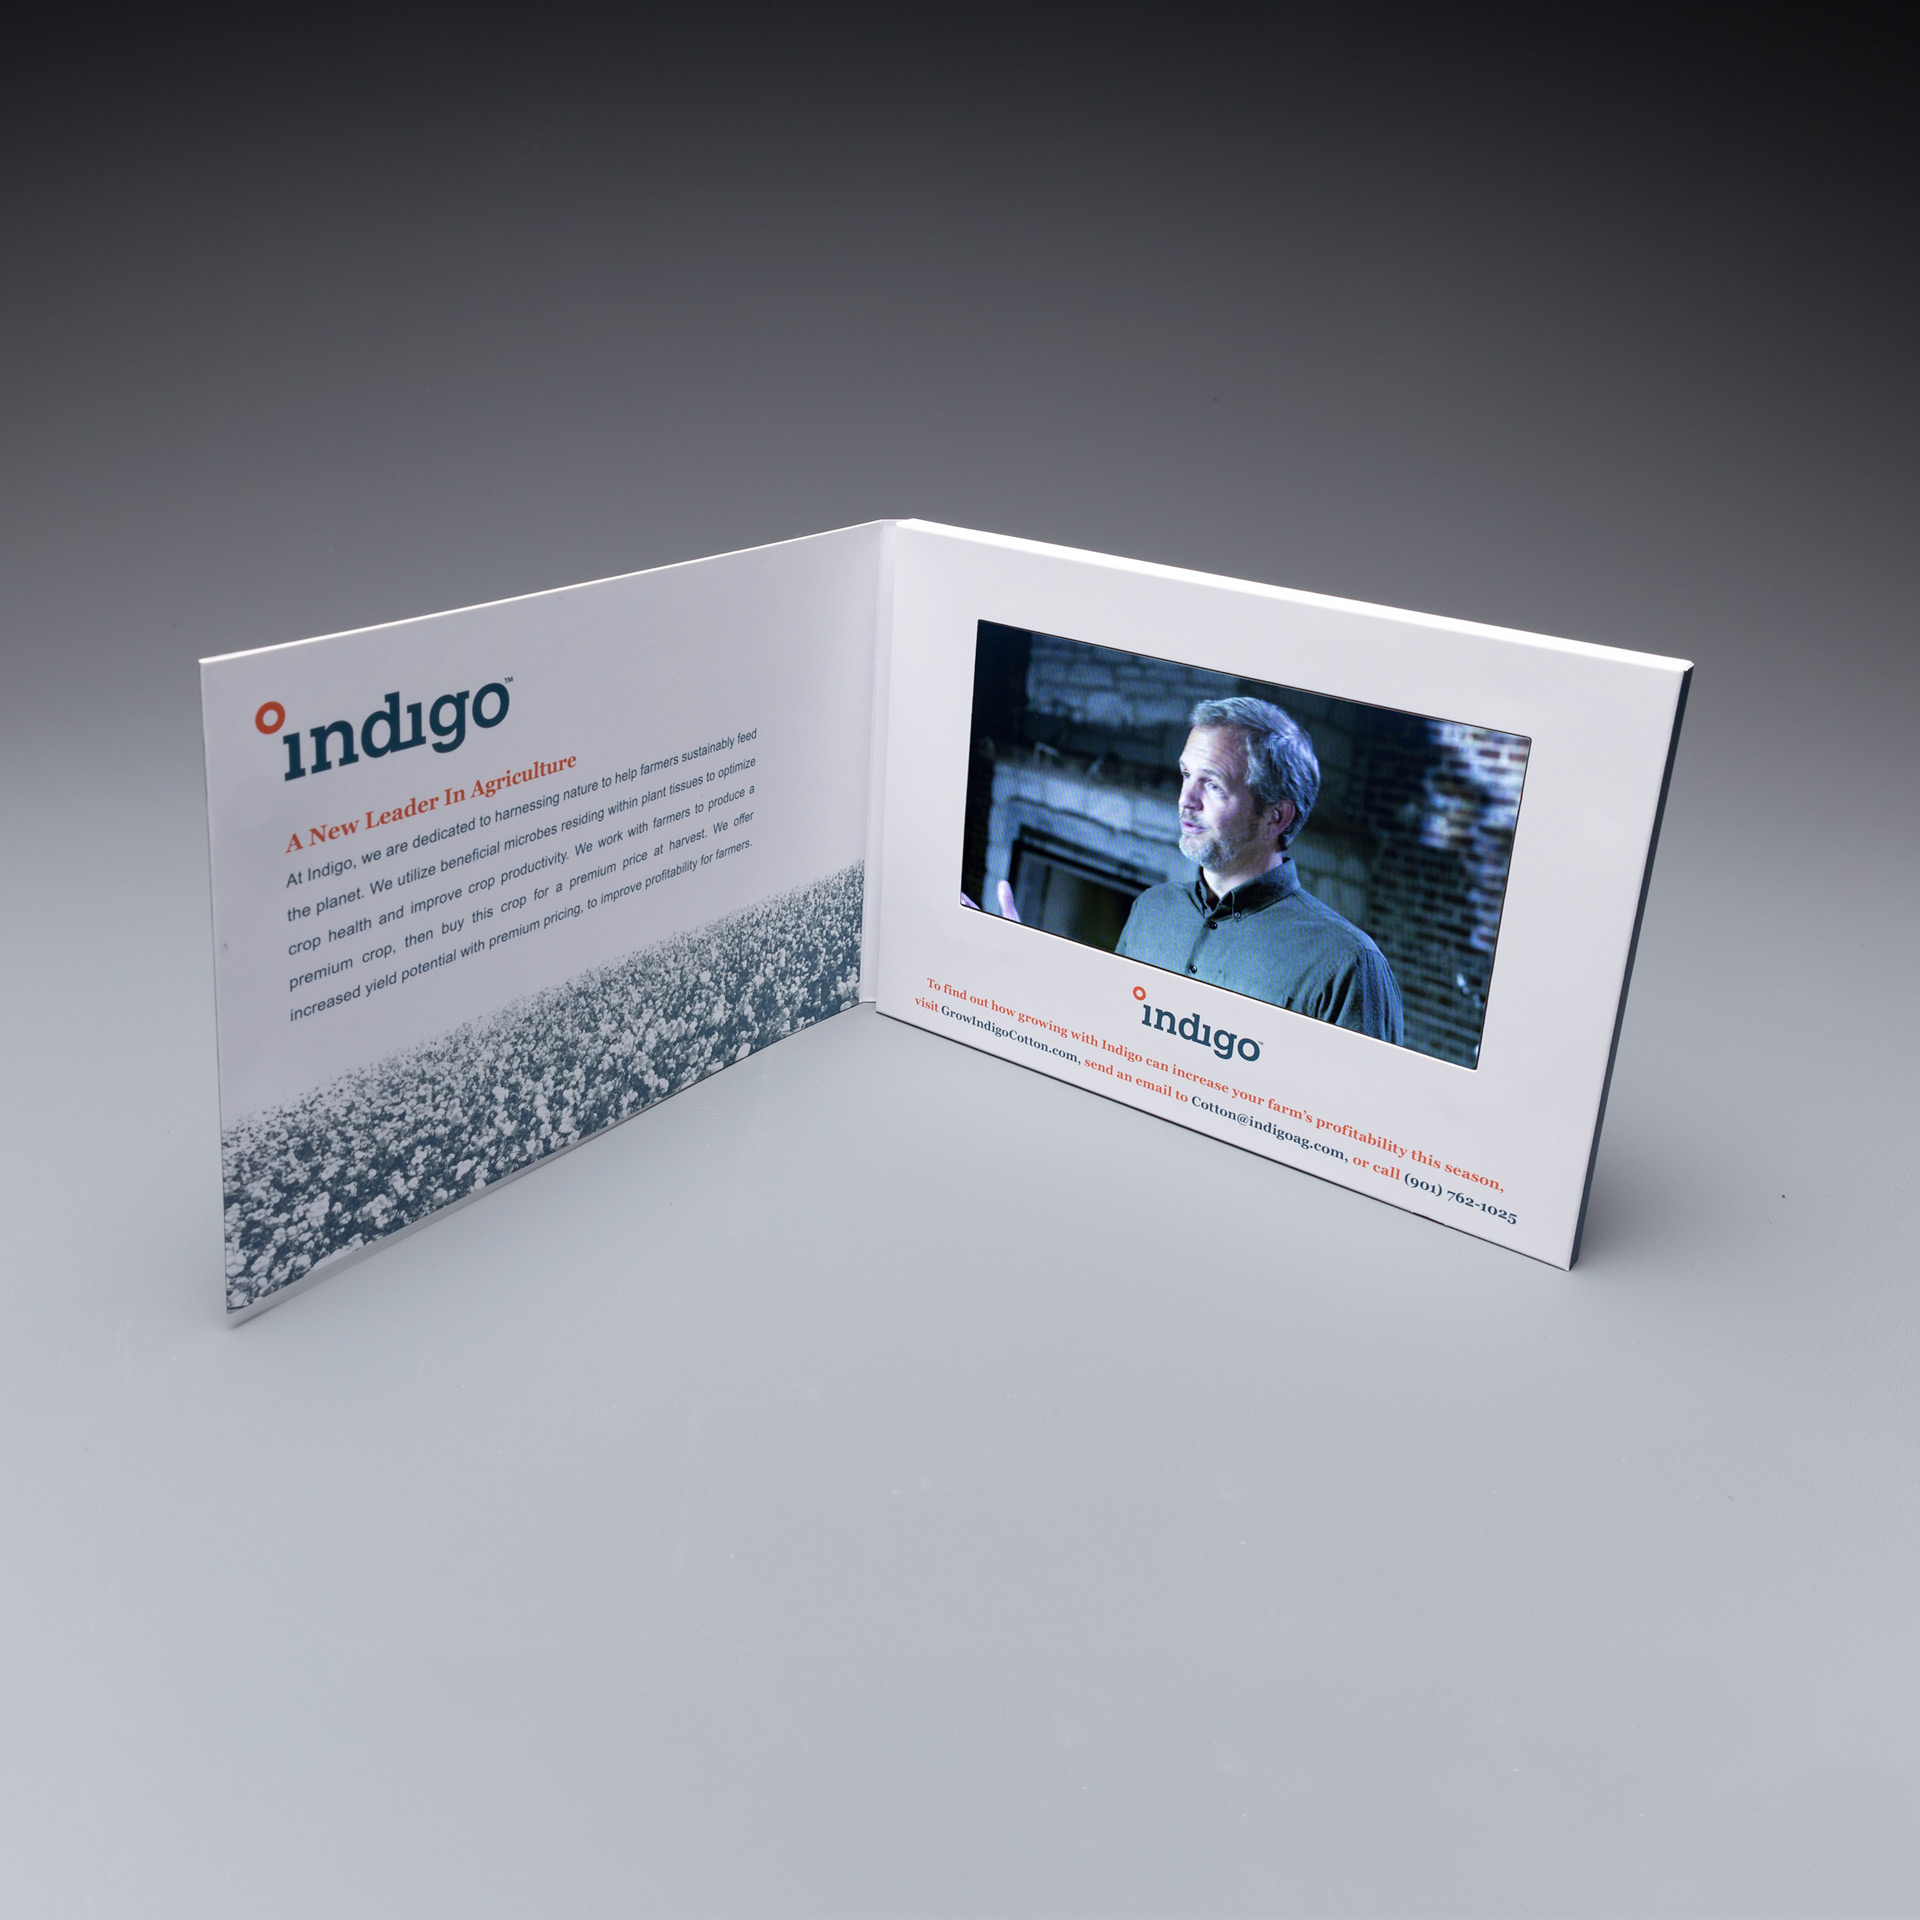 CMO-ToGo Generates New Leads with 7" Video Screen Brochure 